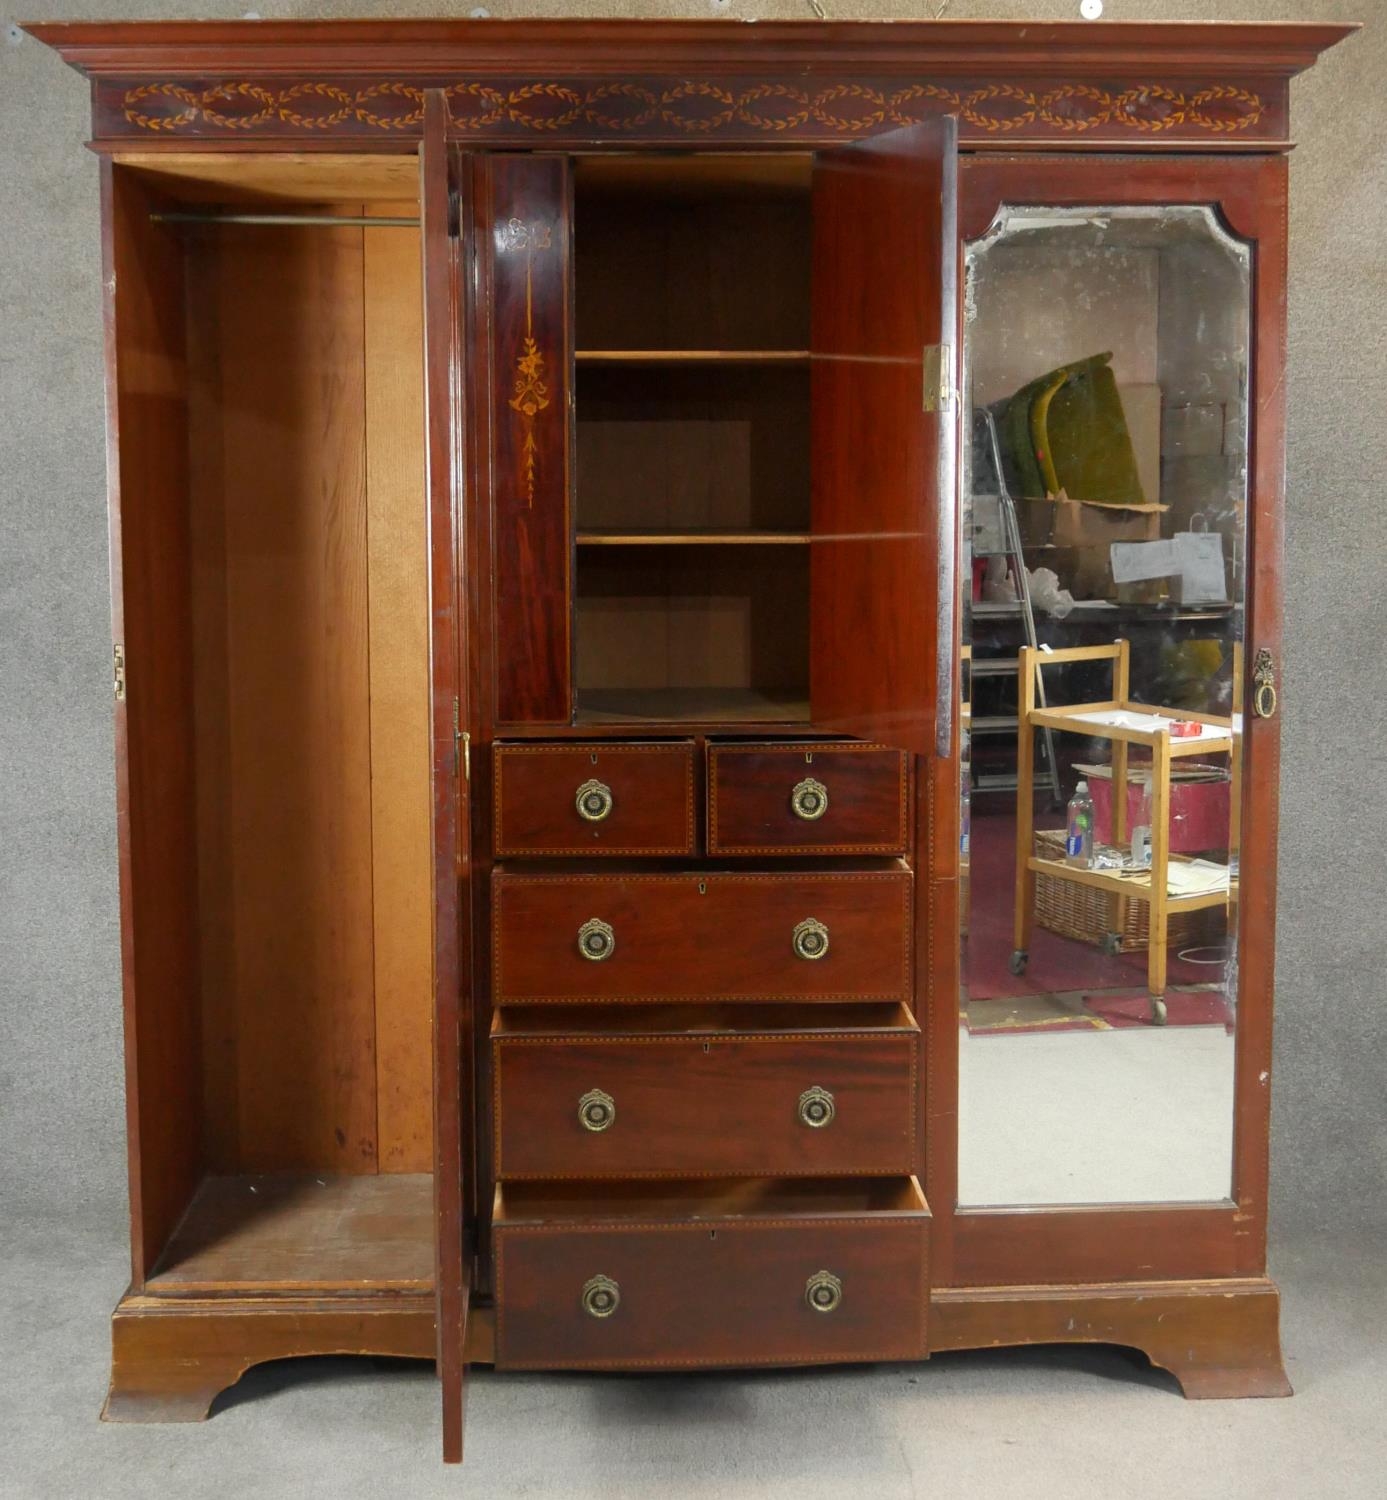 A C.1900 mahogany triple section compactum wardrobe with satinwood scrolling foliate, ribbon and - Image 4 of 9